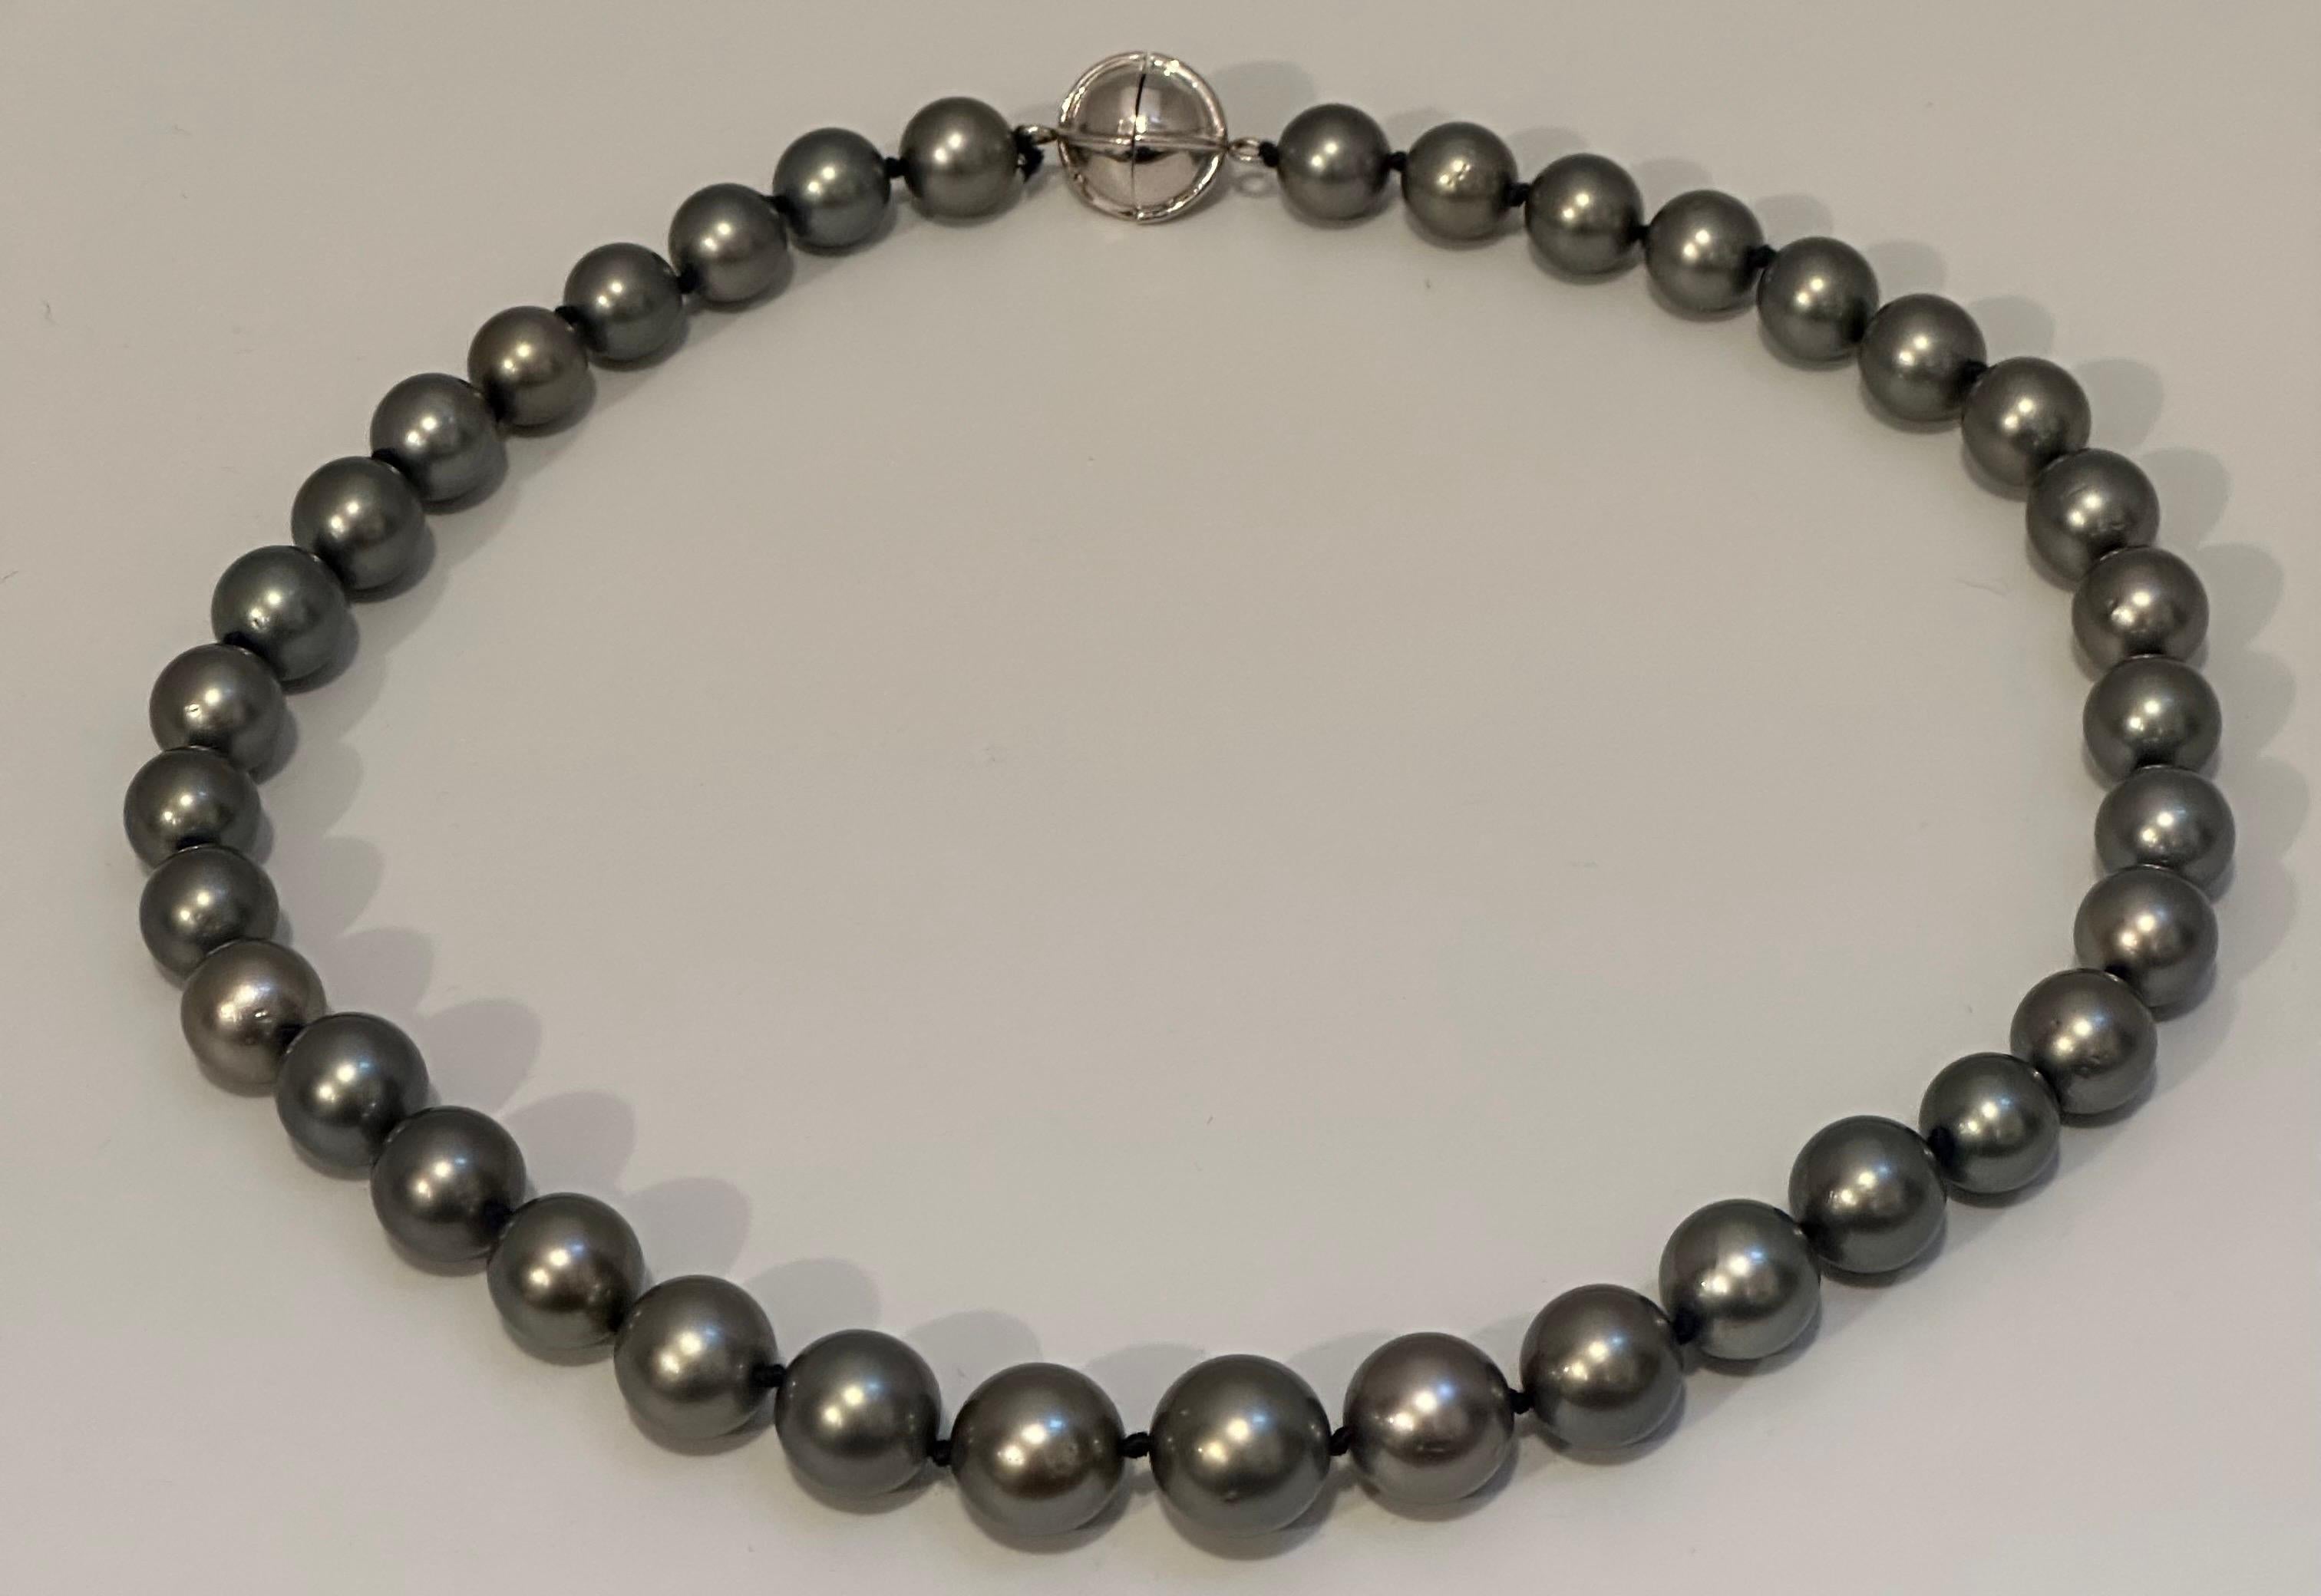 11-15 mm Tahitian Black Graduating Pearls Strand Necklace, Estate, WG For Sale 2